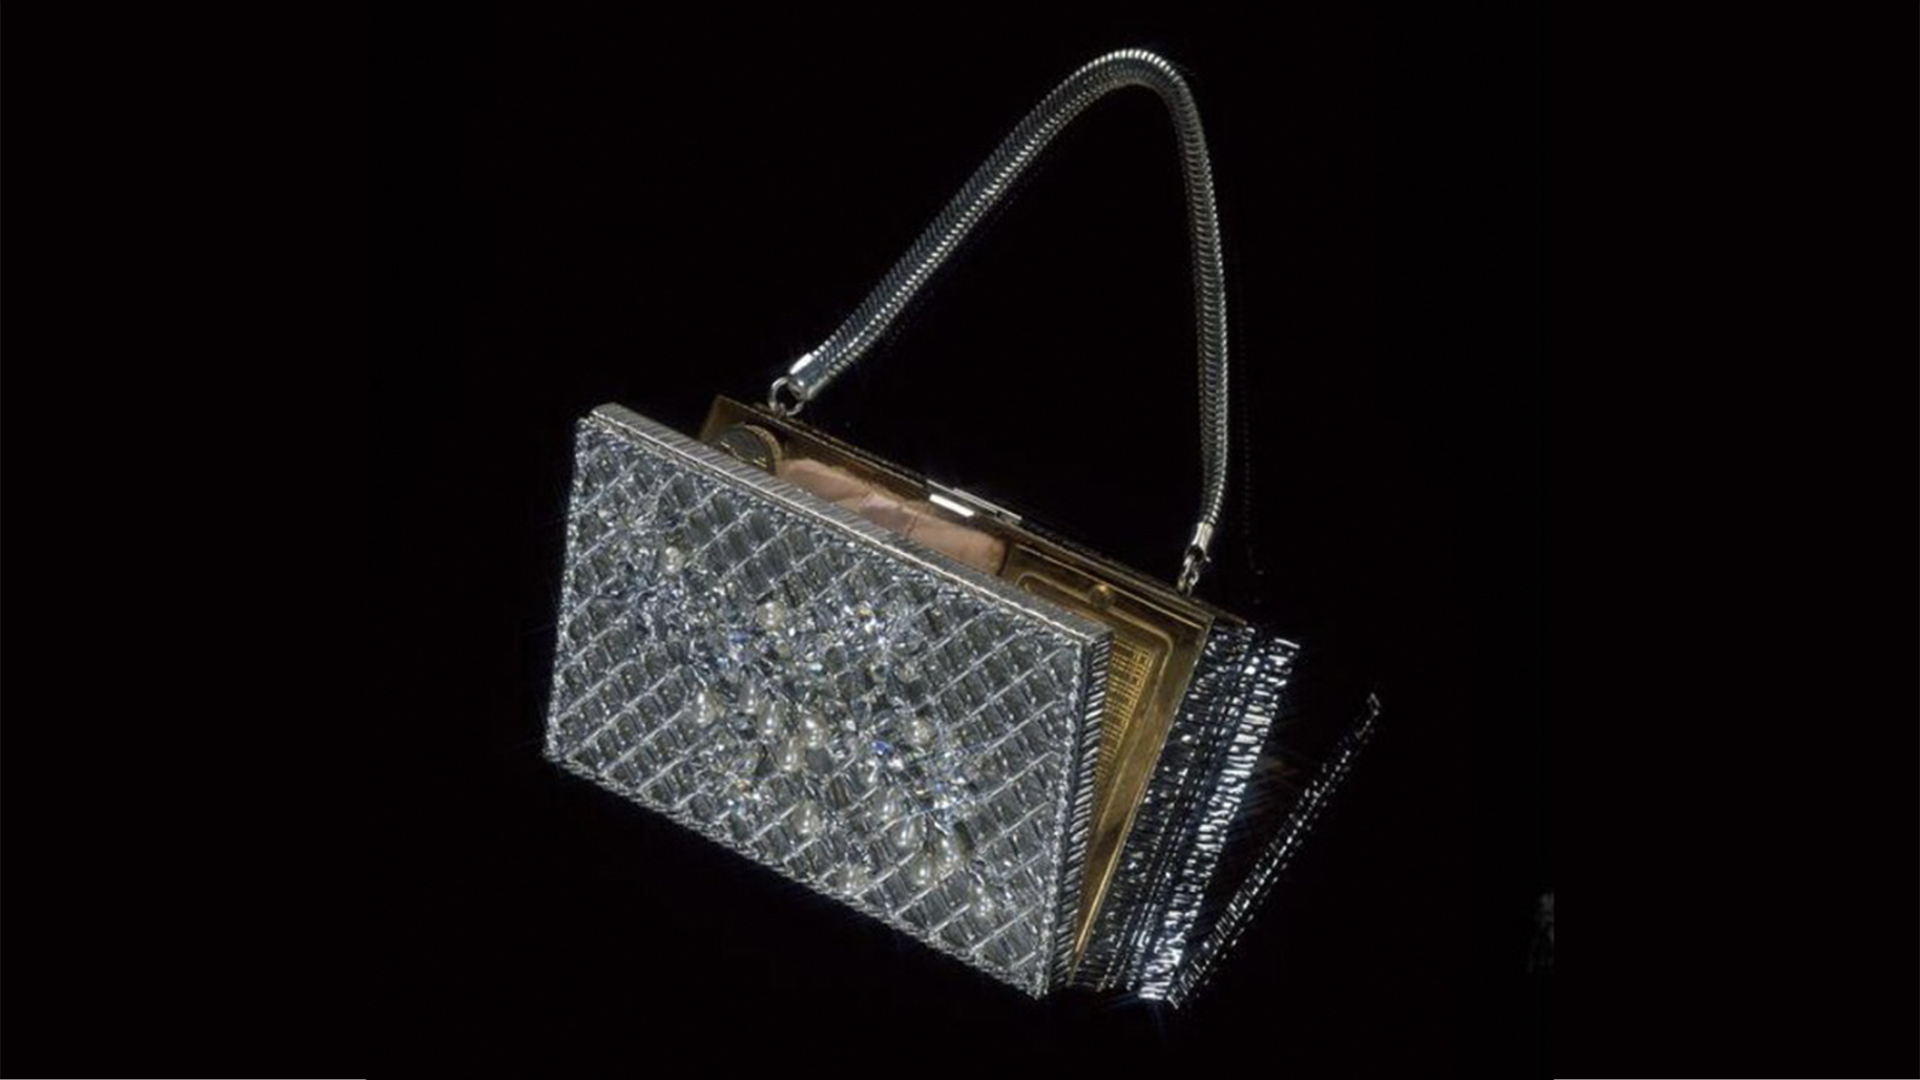 Handbag decorated with faux pearls